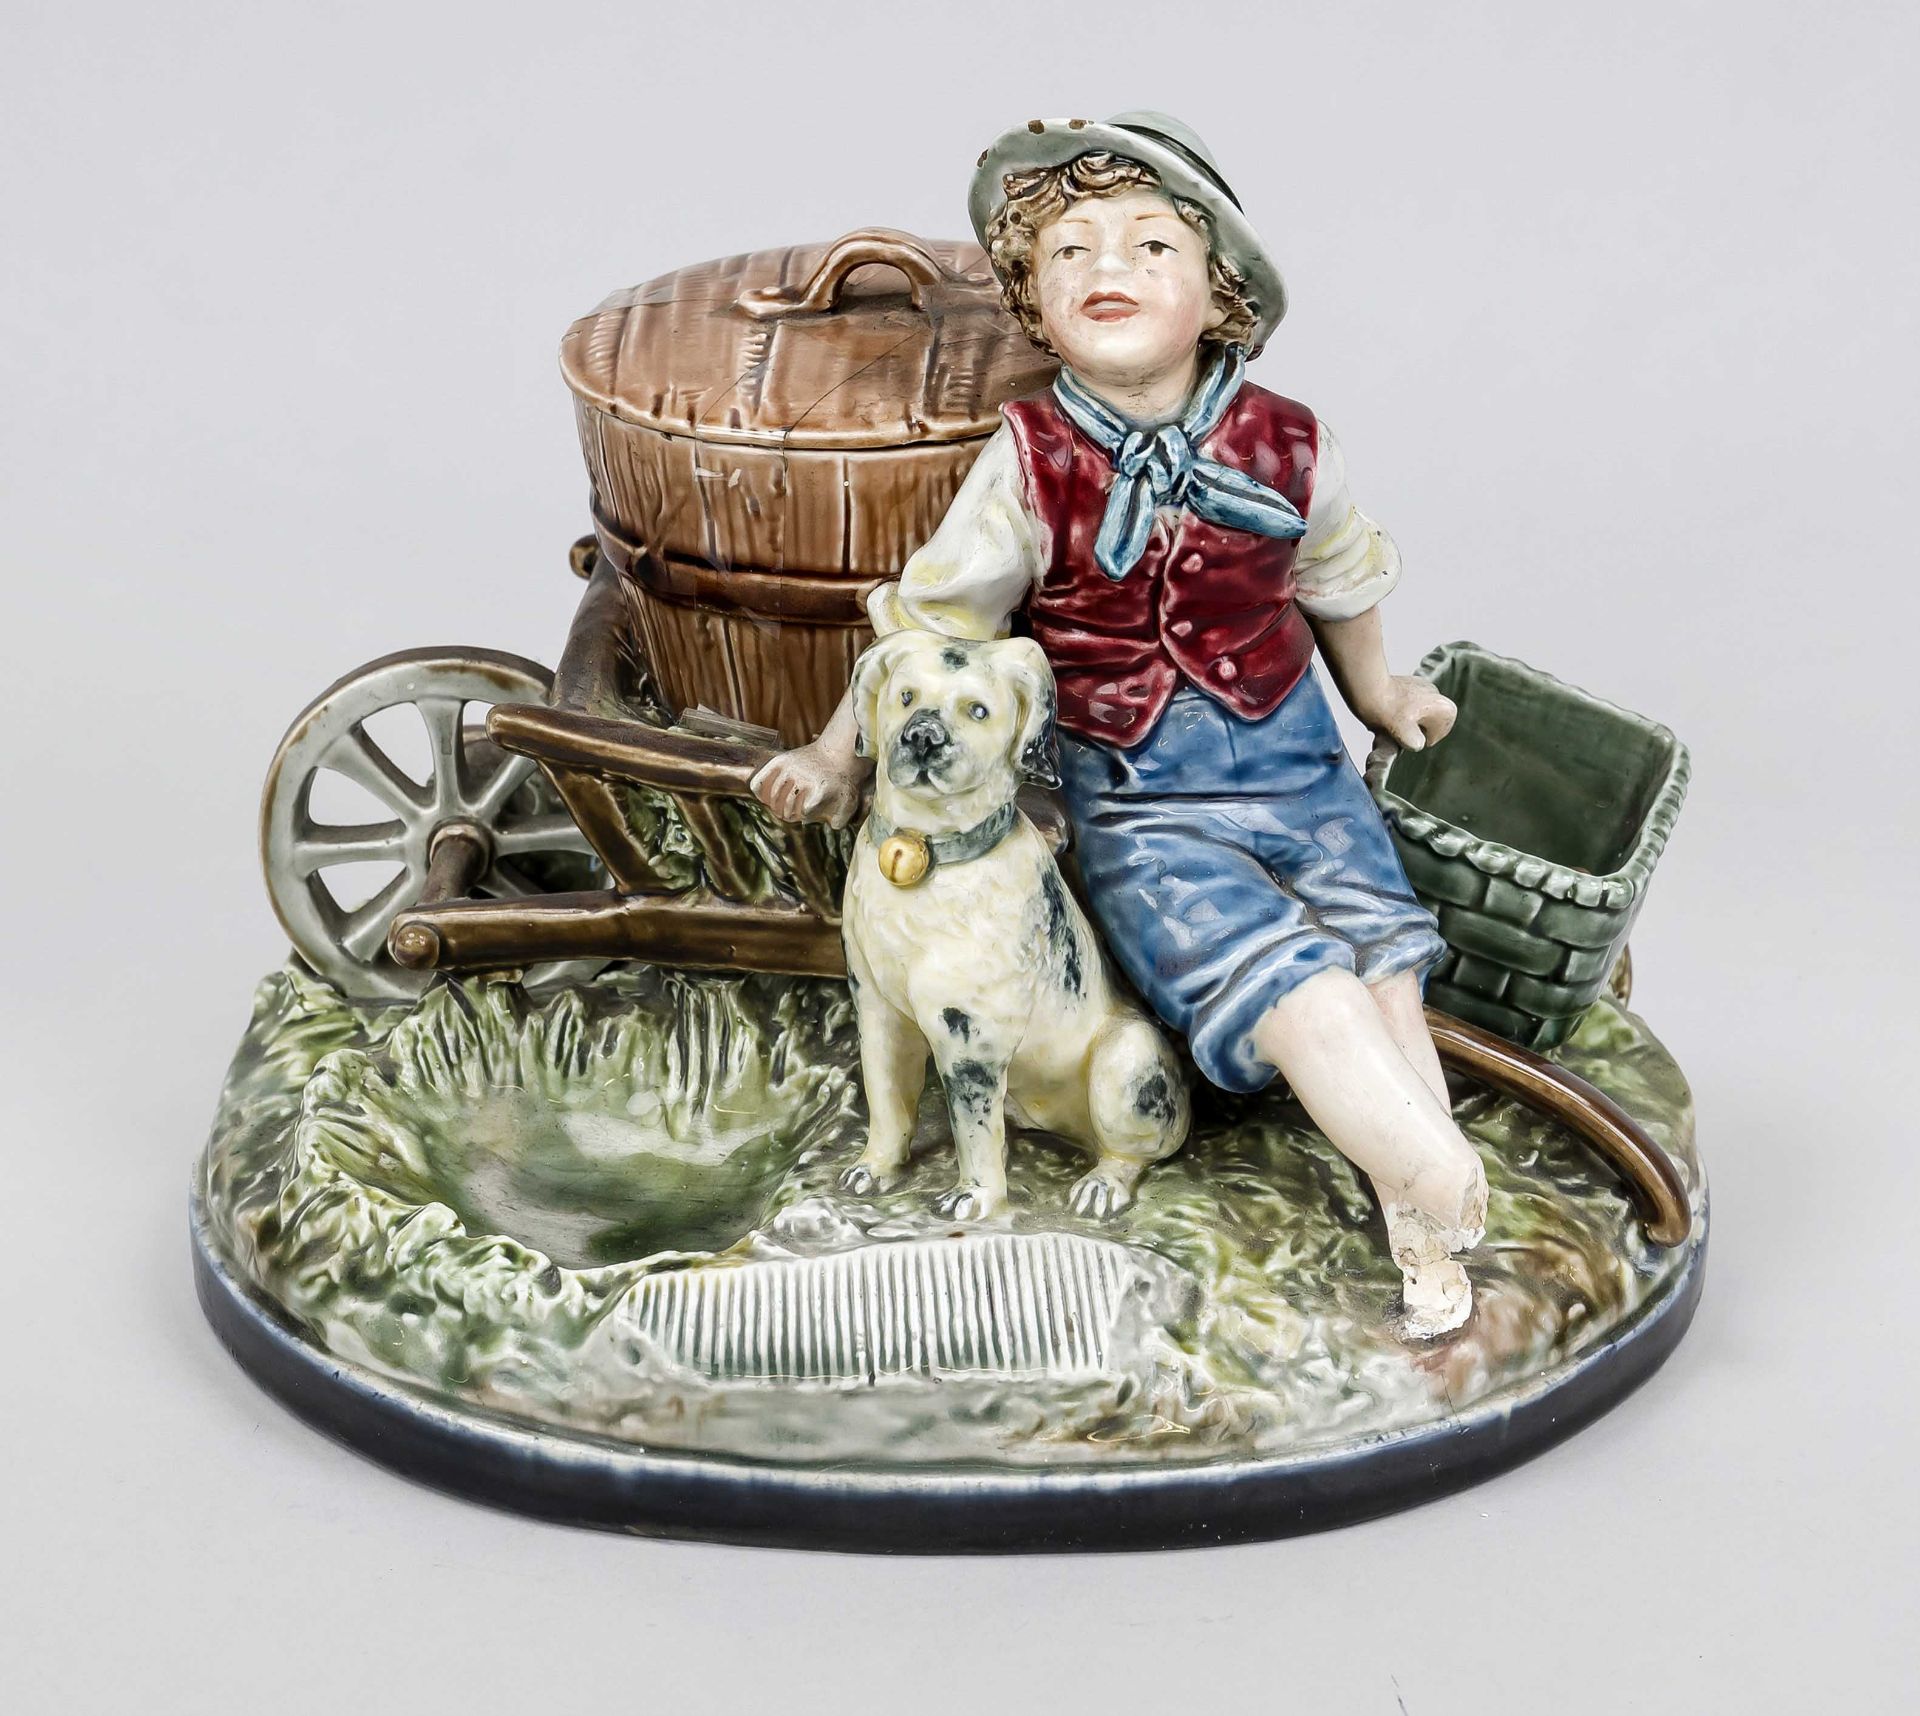 Faience smoking set, late 19th century, polychrome painted and glazed stoneware. Boy with dog